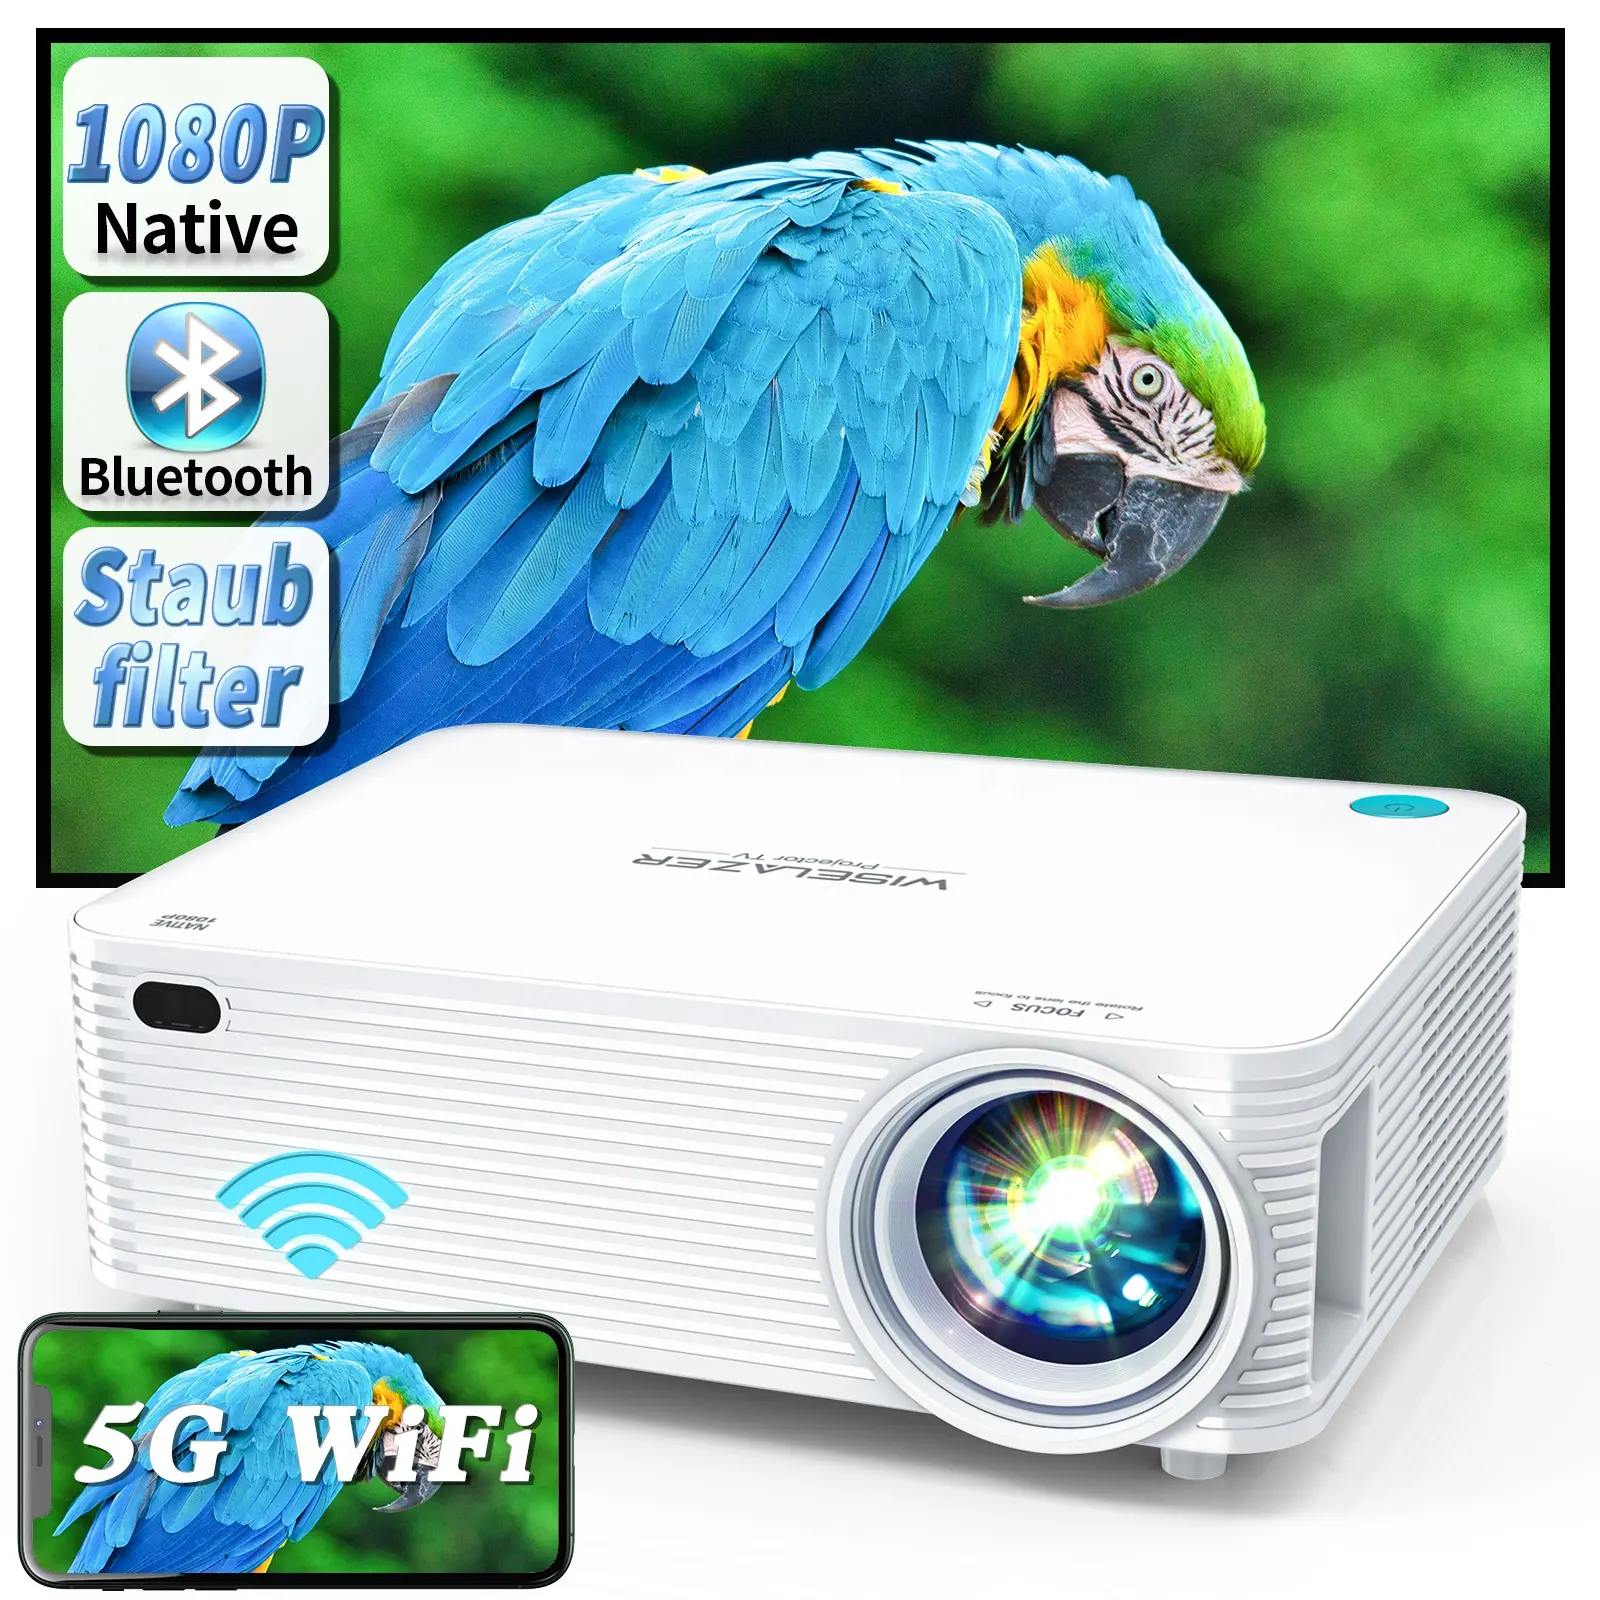 OEM/ODM ZAOLIGHTECWiFi 1080P Projector A30 Supported Clear Image Projection with mini home projector portable